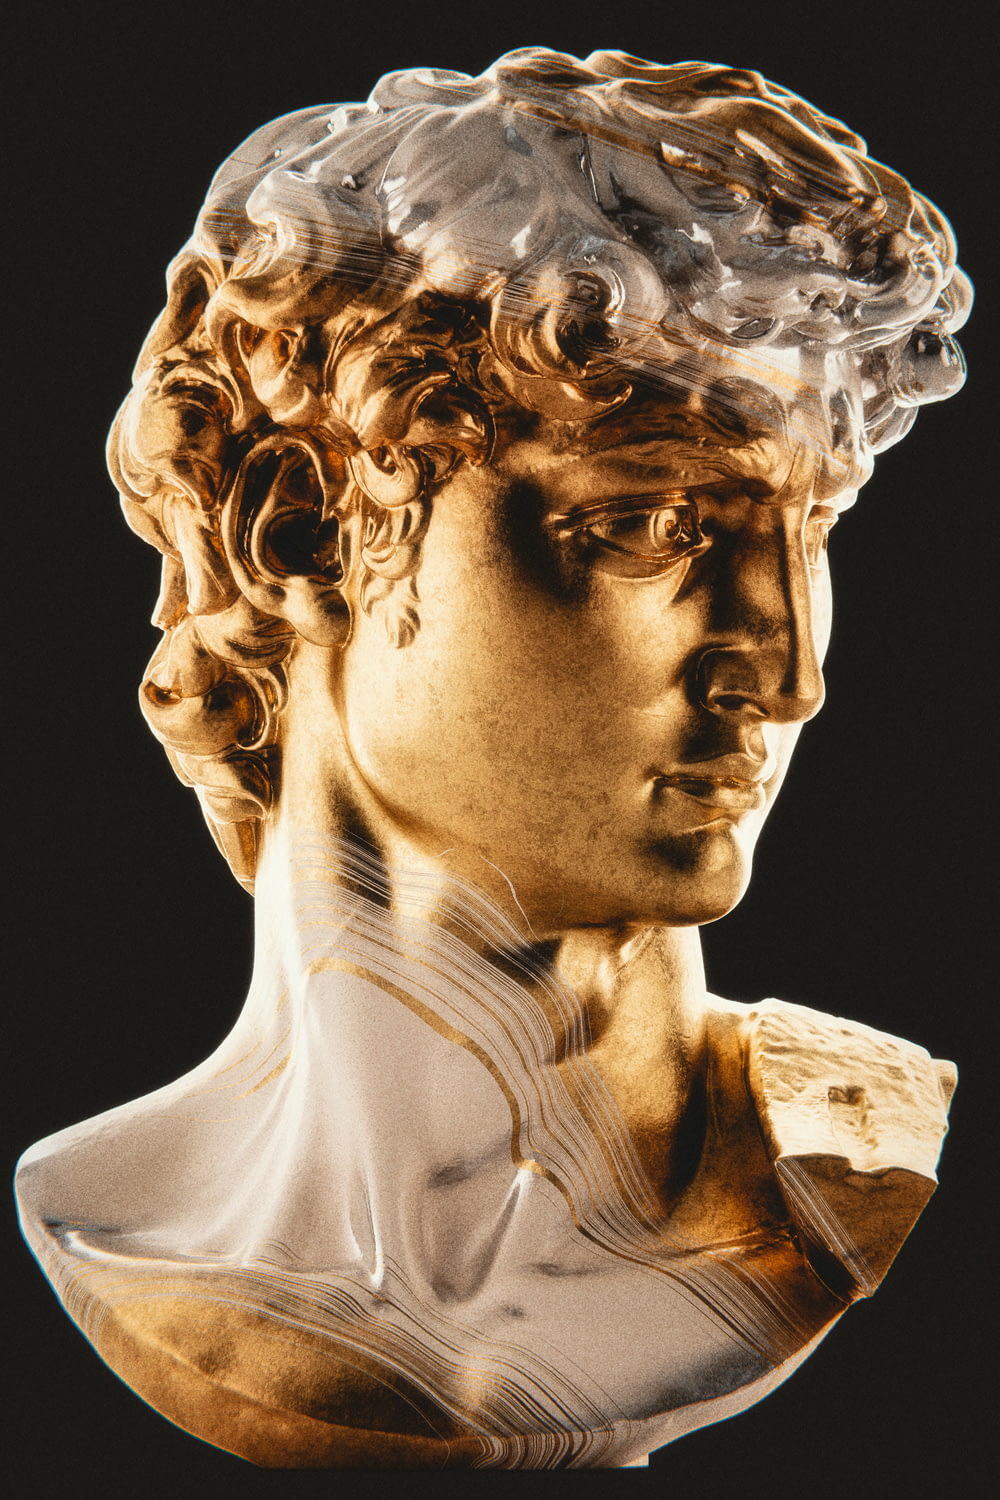 a close up of a statue of a man with curly hair